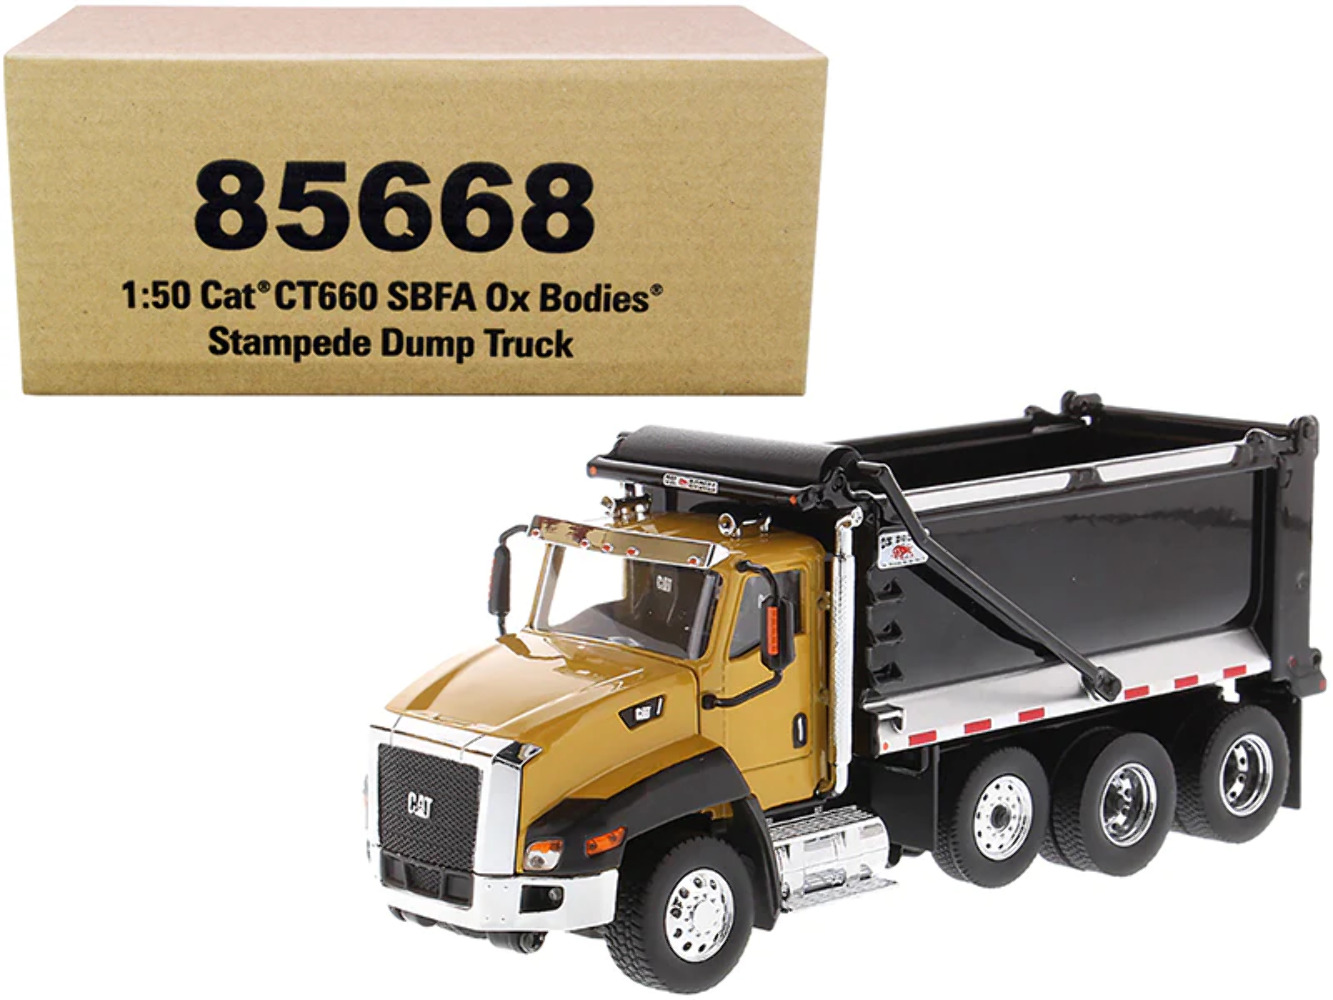 CAT CT660 SBFA with Ox Bodies Stampede Dump Truck and 1/50 Diecast Model